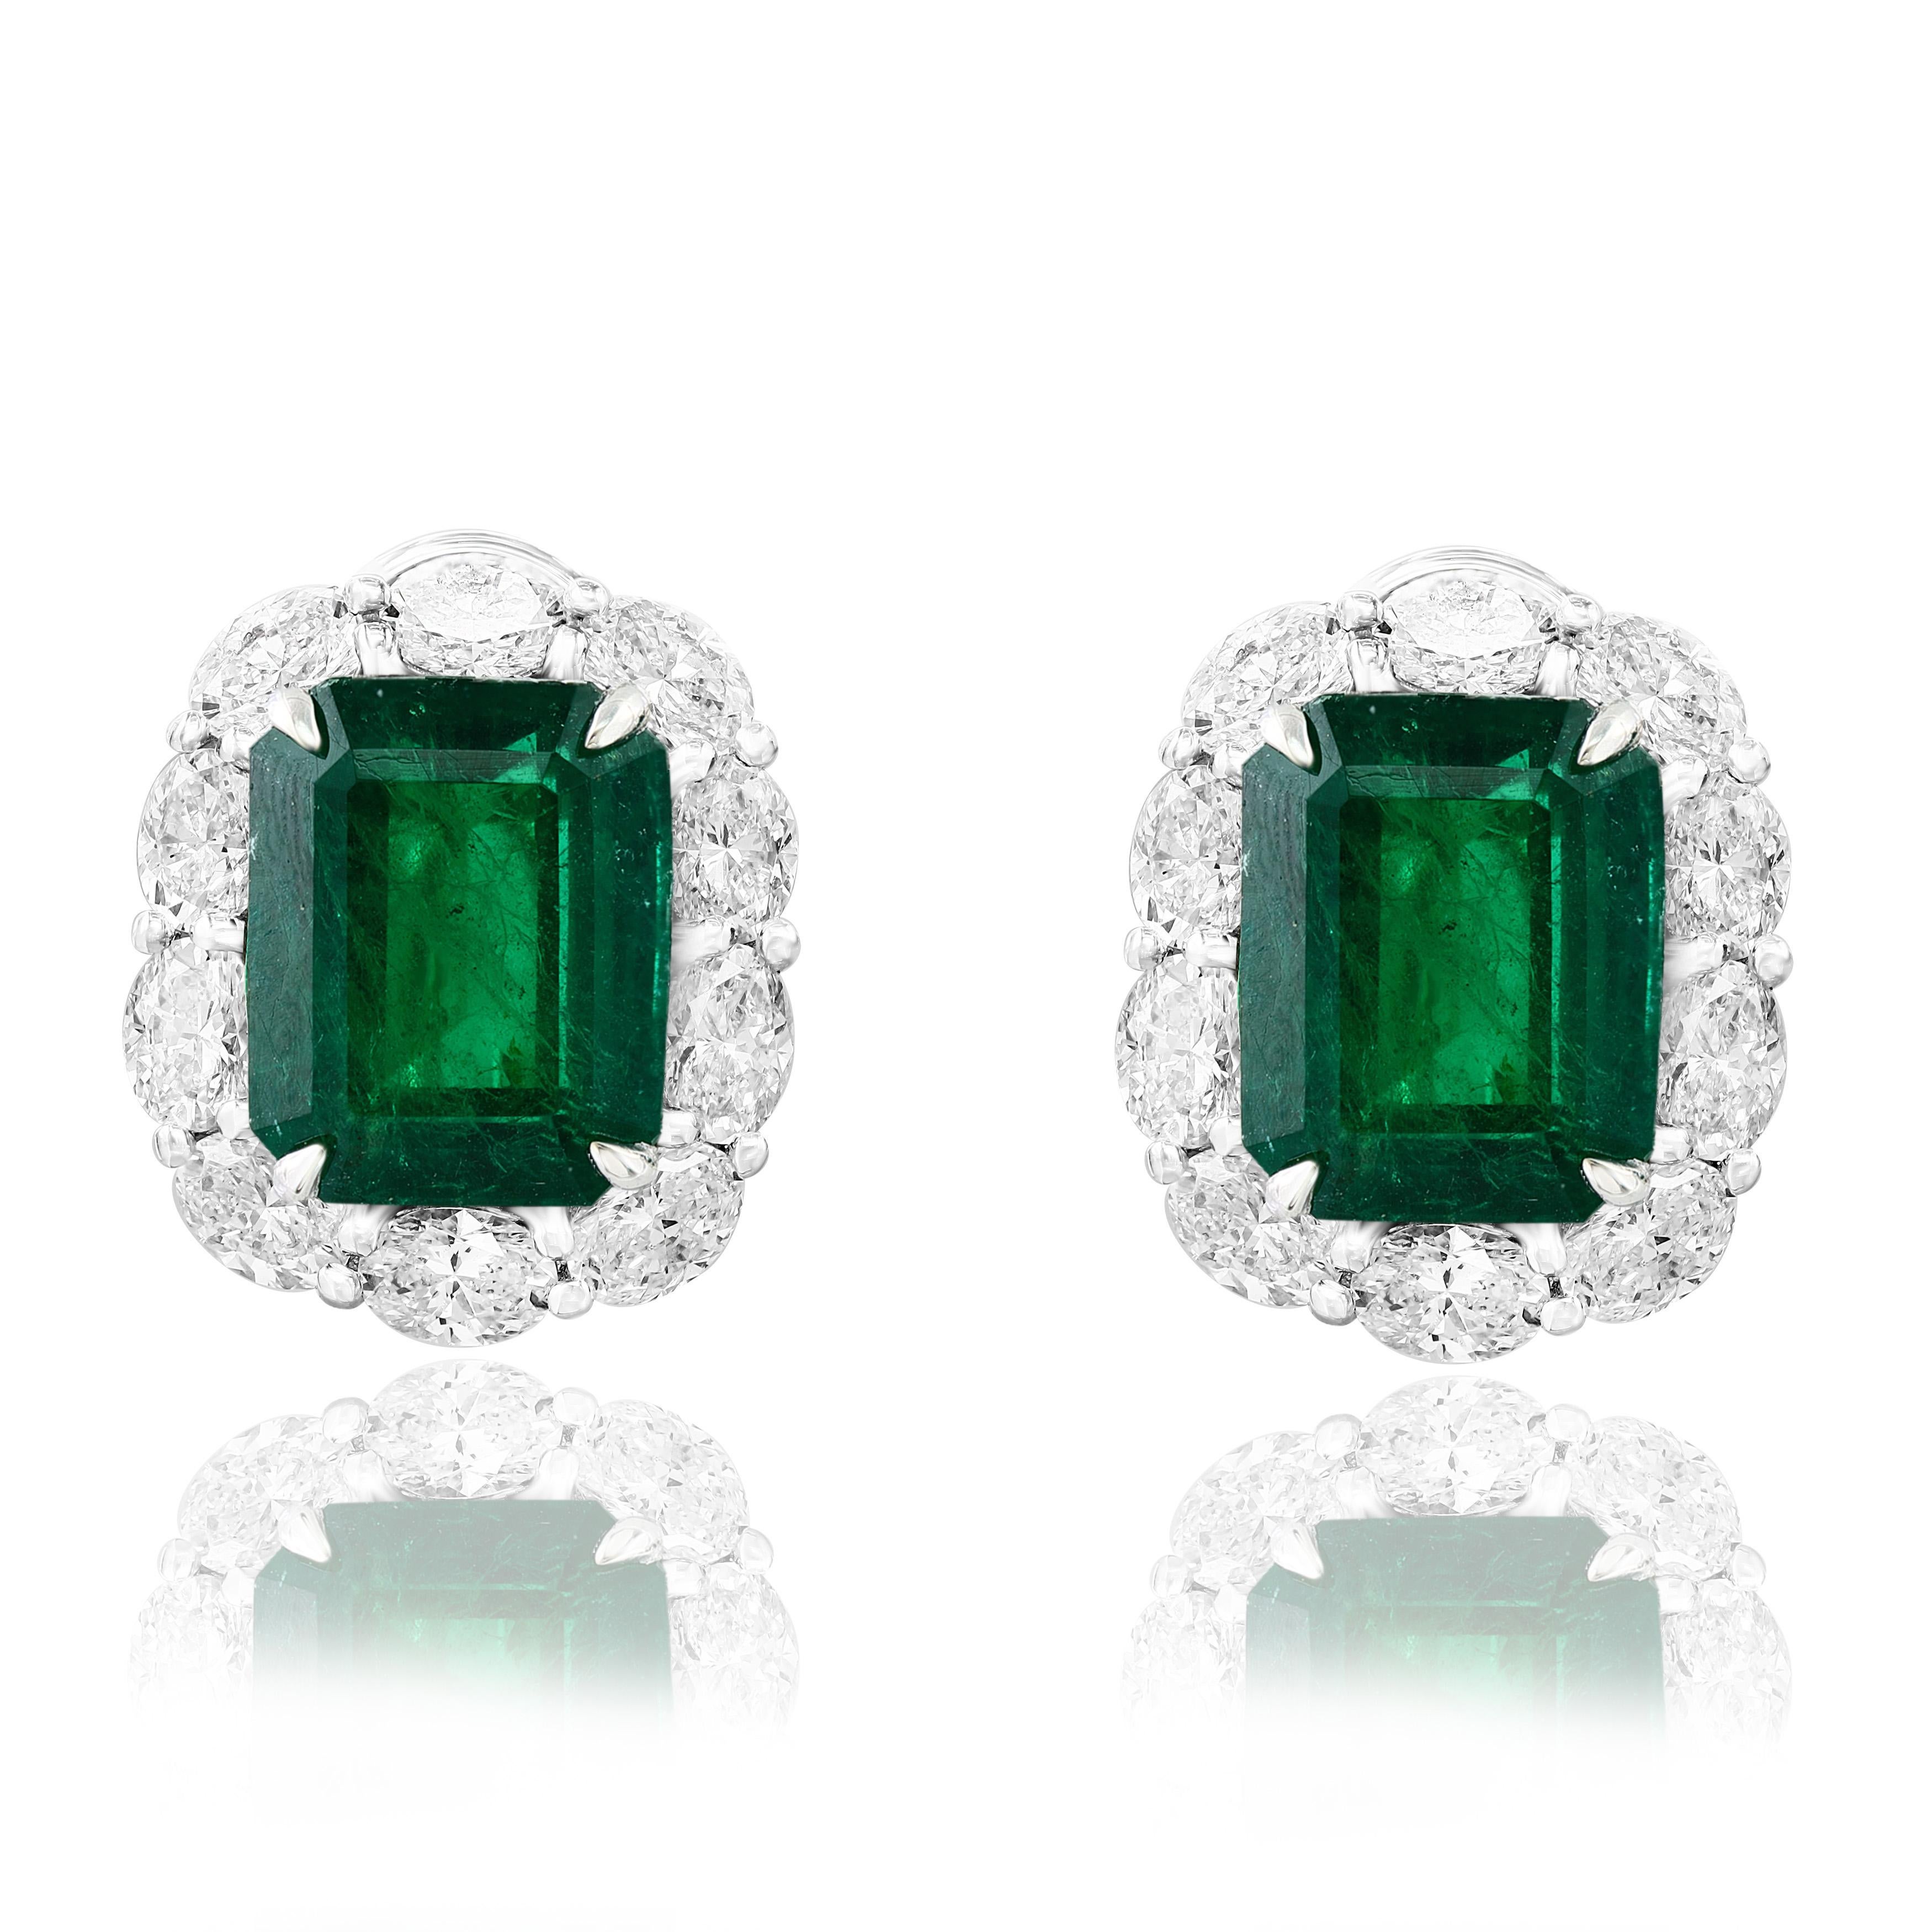 Showcasing two color-rich Emerald cut Lush Green Emeralds weighing 7.44 carats total, surrounded by a single row of oval-cut brilliant diamonds. 20 Accent diamonds weigh 2.89 carats in total. Set in 18 karats white gold. Omega Clip with the